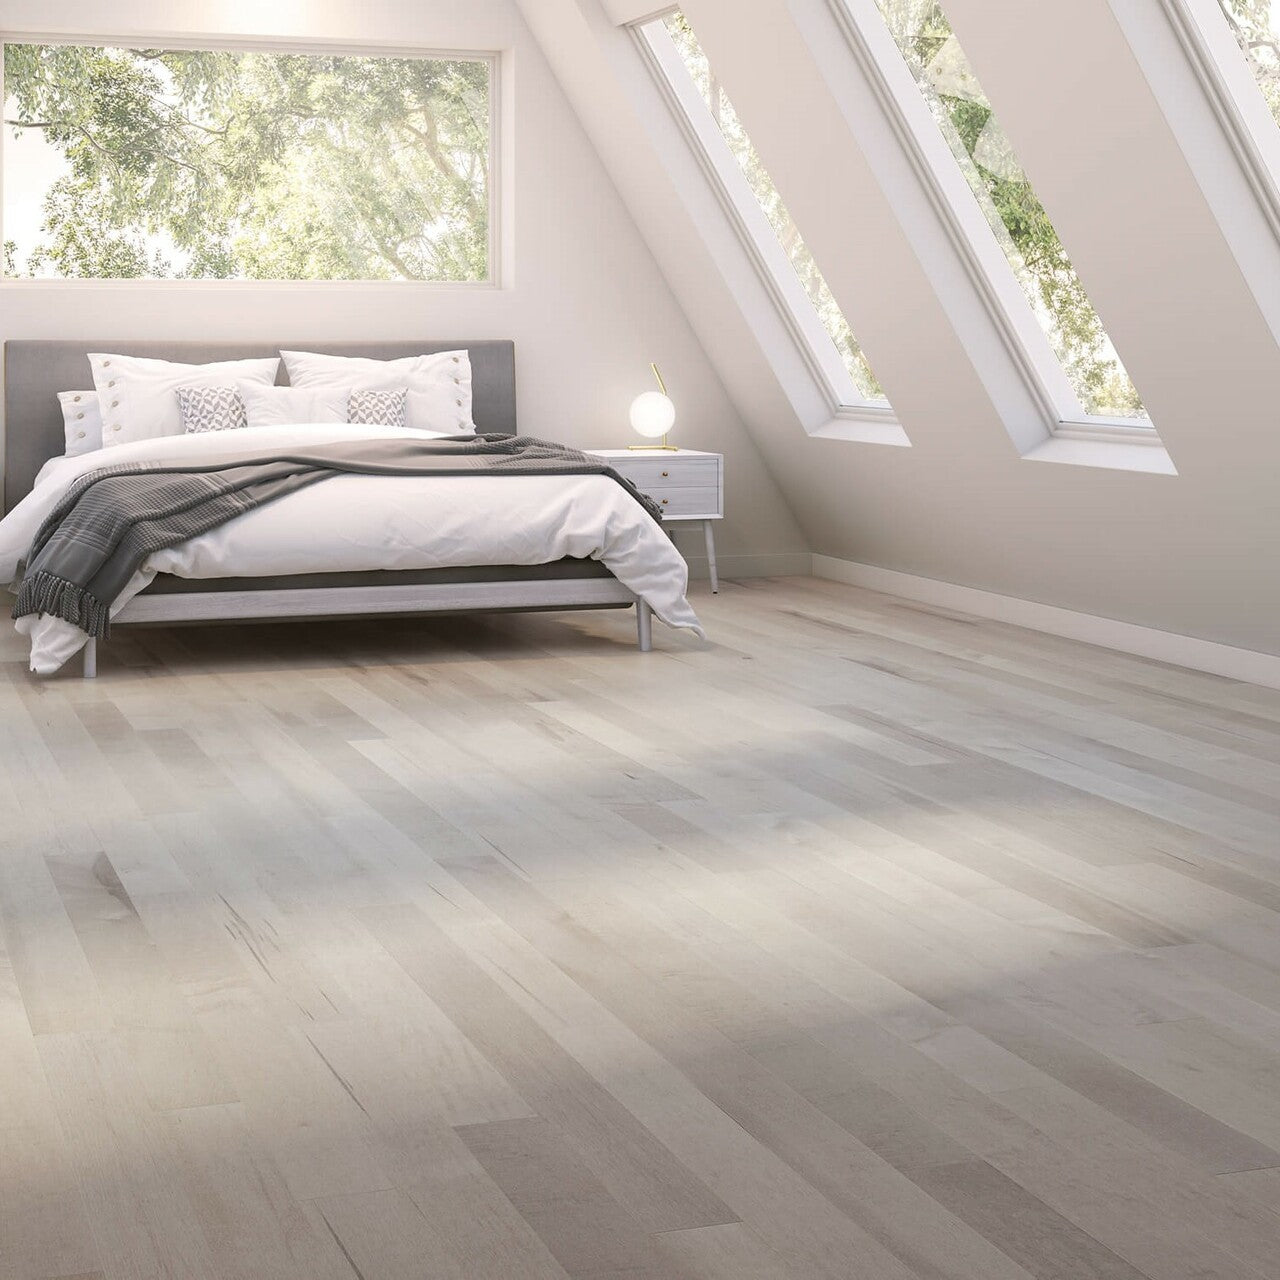 45 Perfect Wood Floor Ideas to upgrade your usual one – Buzz16